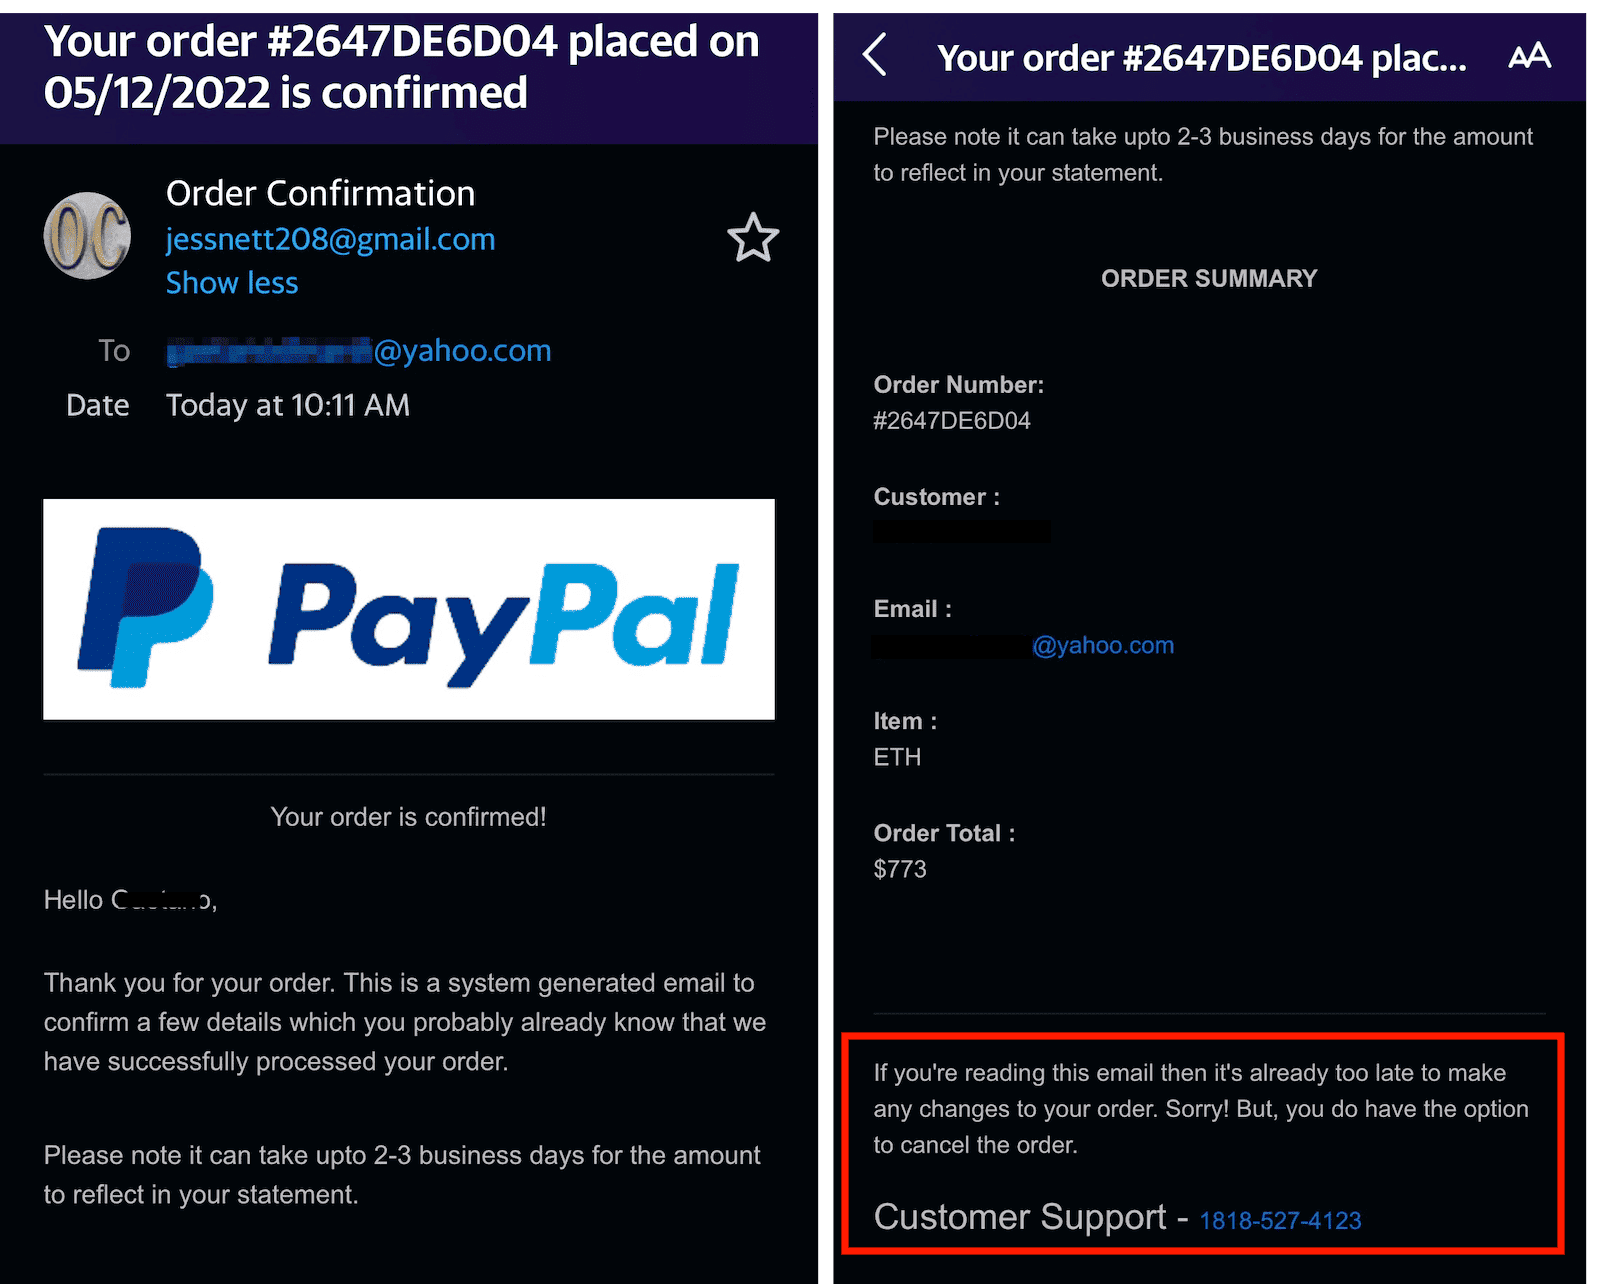 PayPal Phishing Scam Uses Invoices Sent Via PayPal – Krebs on Security